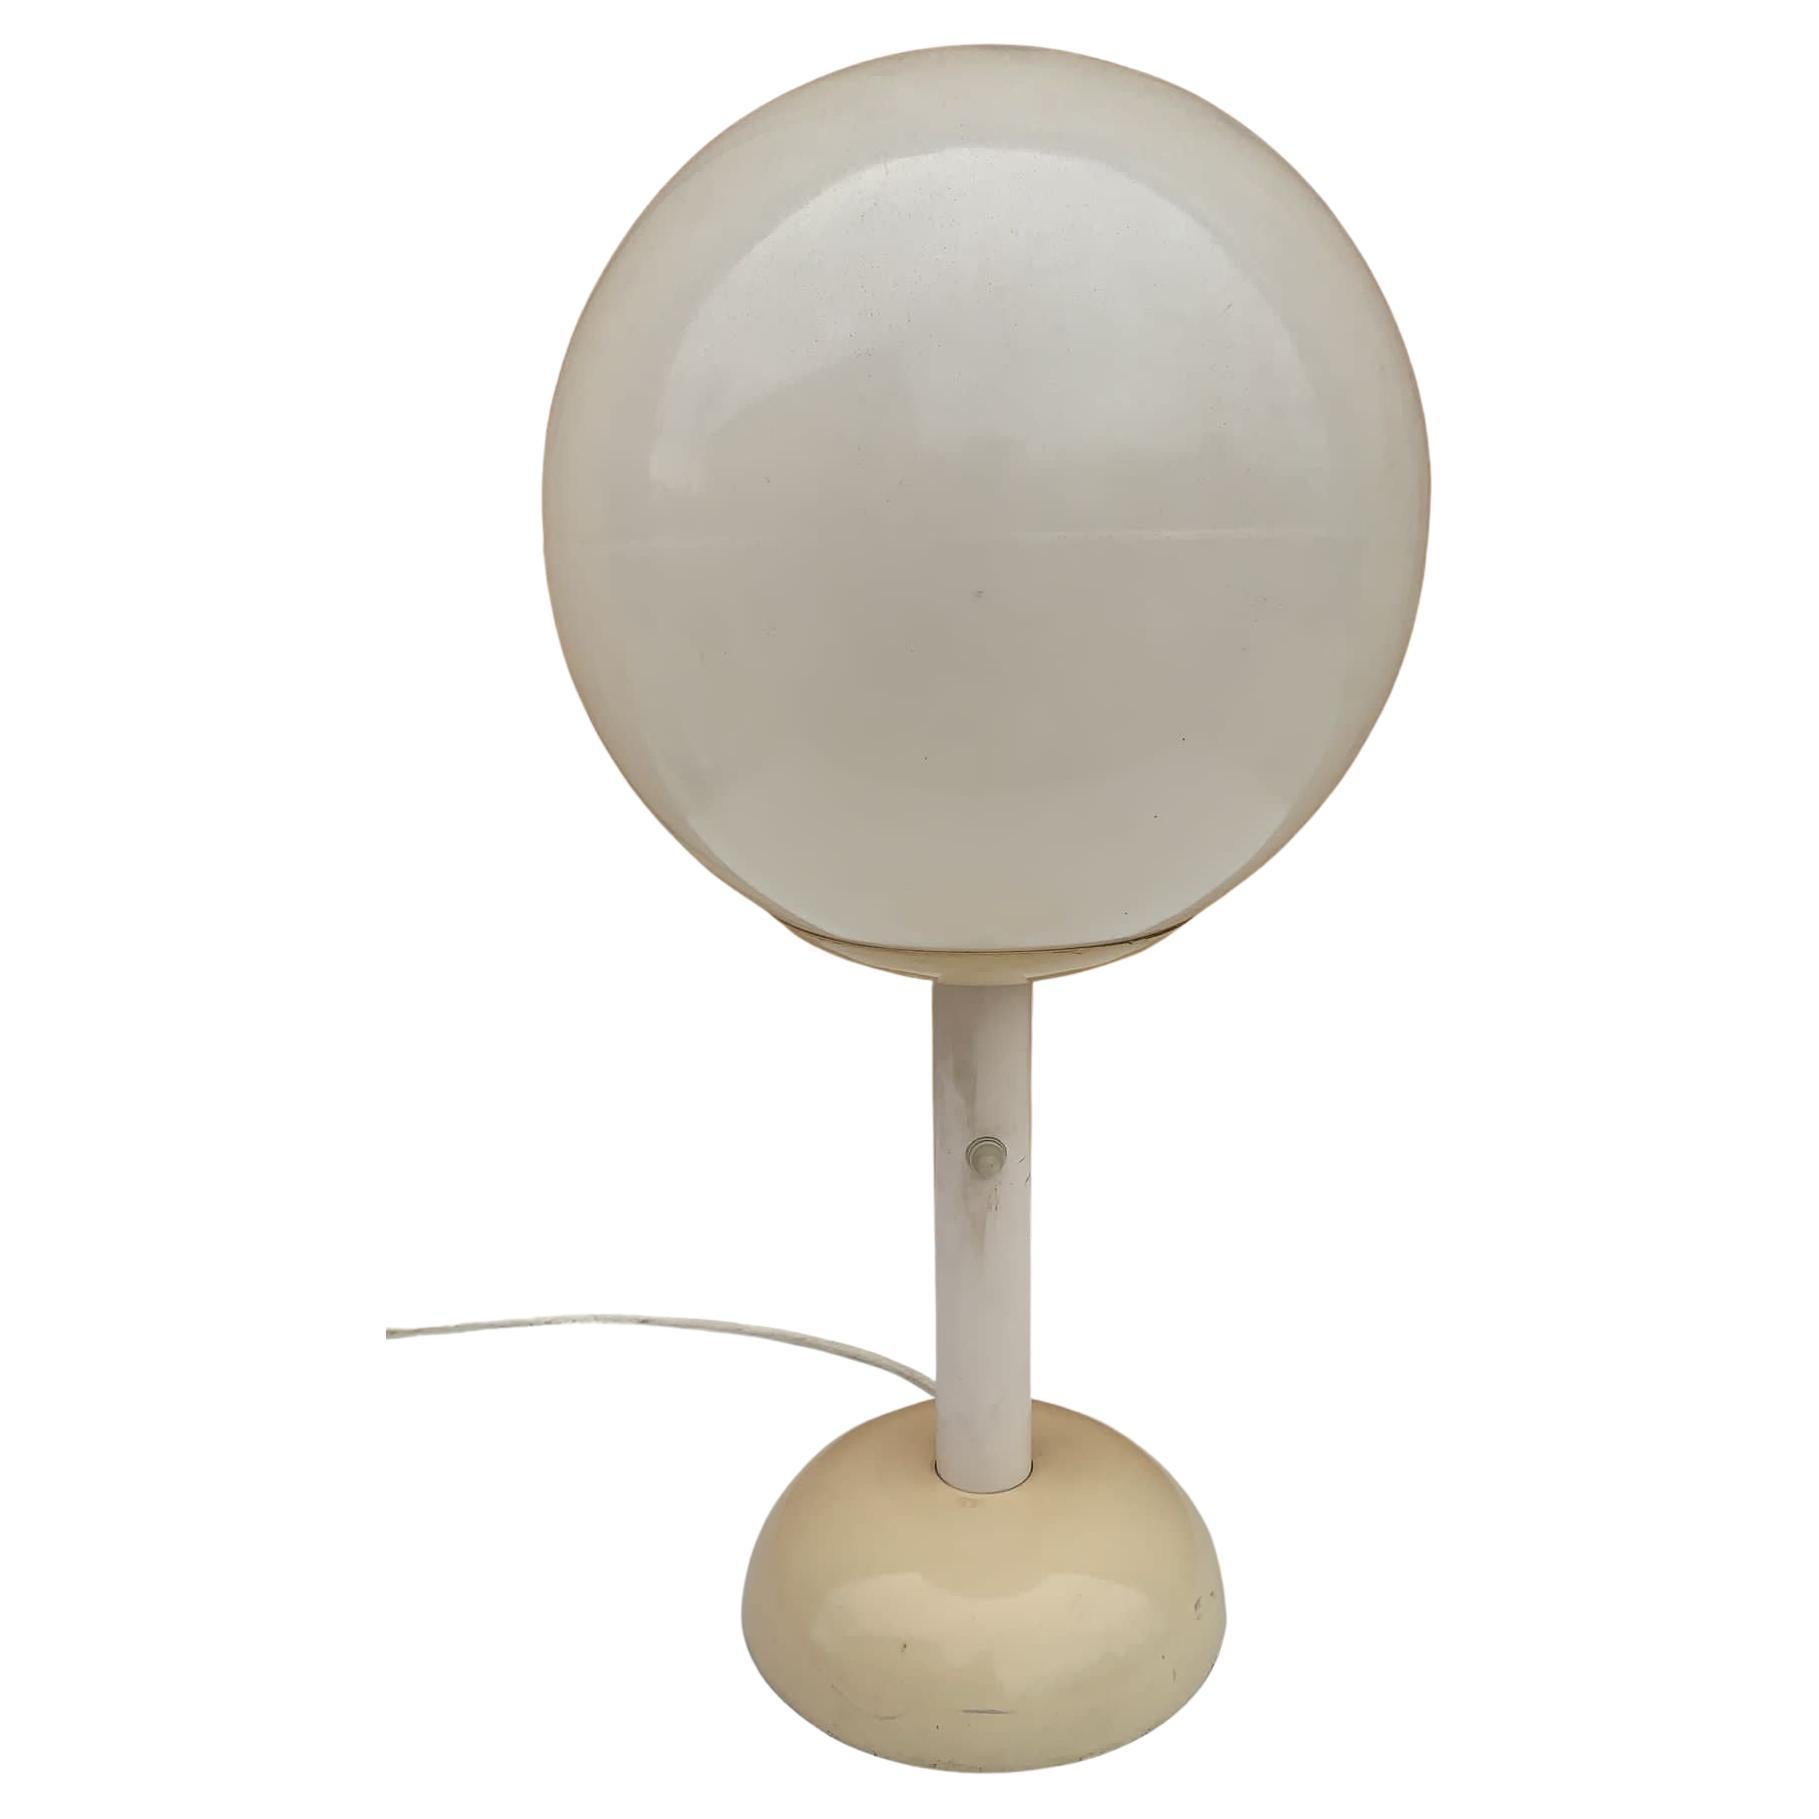 Vintage Mid Century Modern Olympia Lunar 1 Indoor/Outdoor Globe Lamp  For Sale